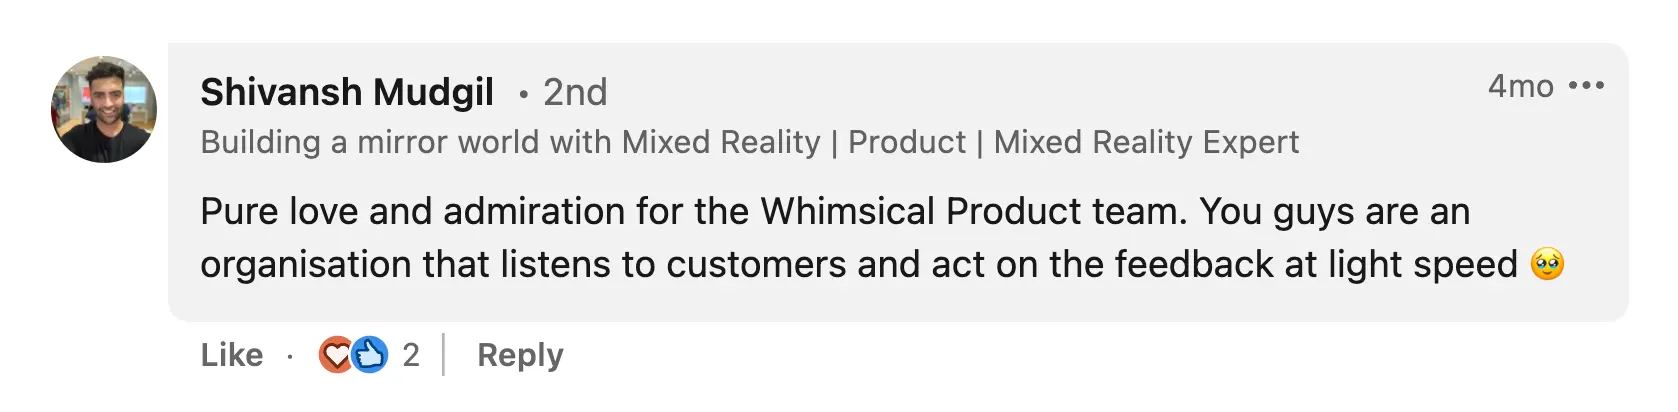 A LinkedIn post from Shivansh Mudgil praising the Whimsical Product team for listening to customers.